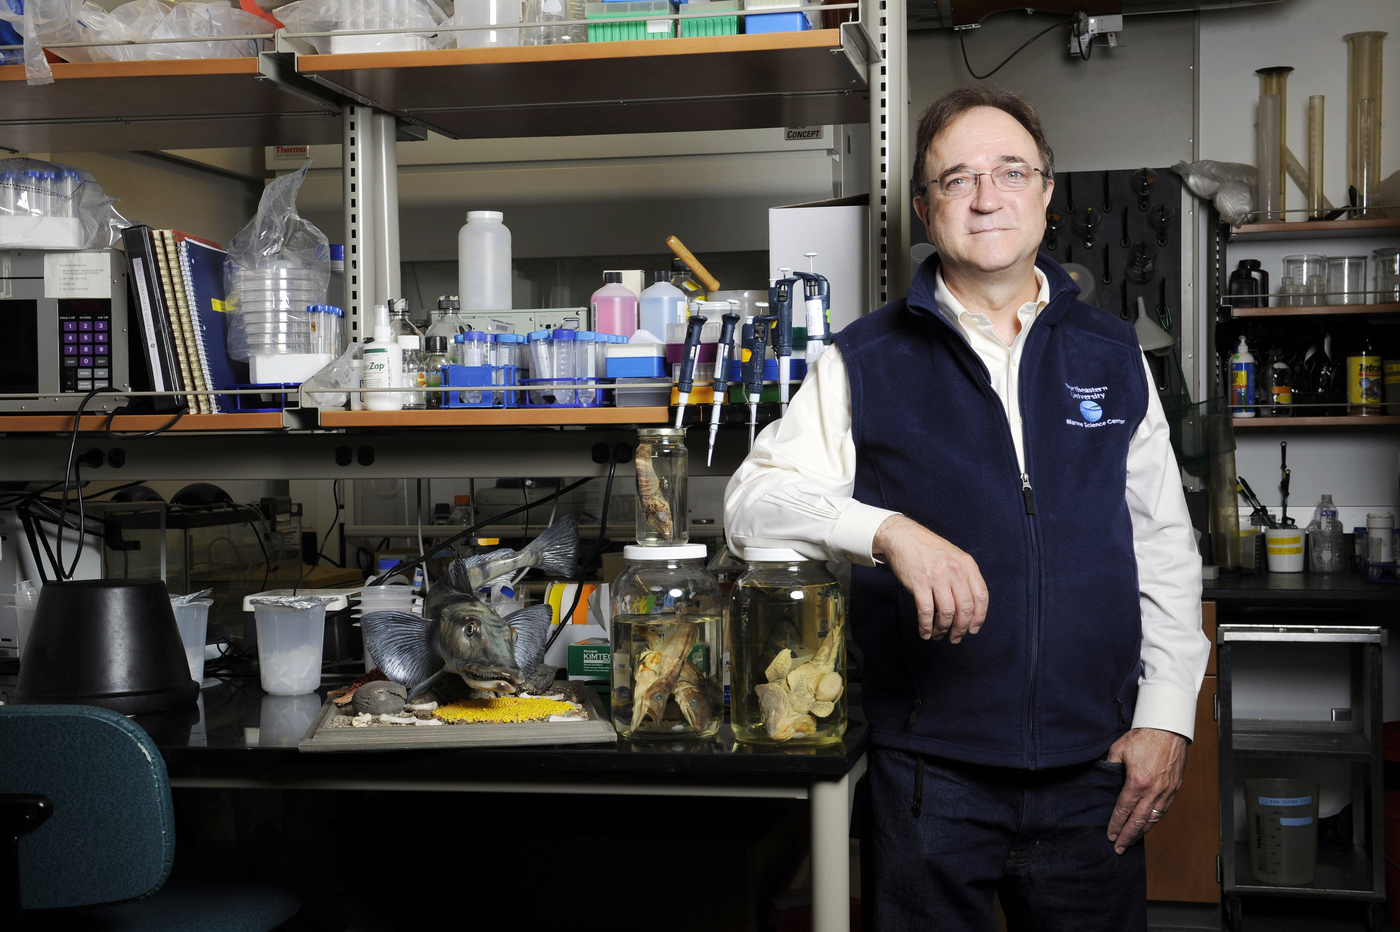 William Detrich, Professor of Marine Molecular Biology and Biochemistry posed for a portrait in the Marine Science Center at Northeastern University